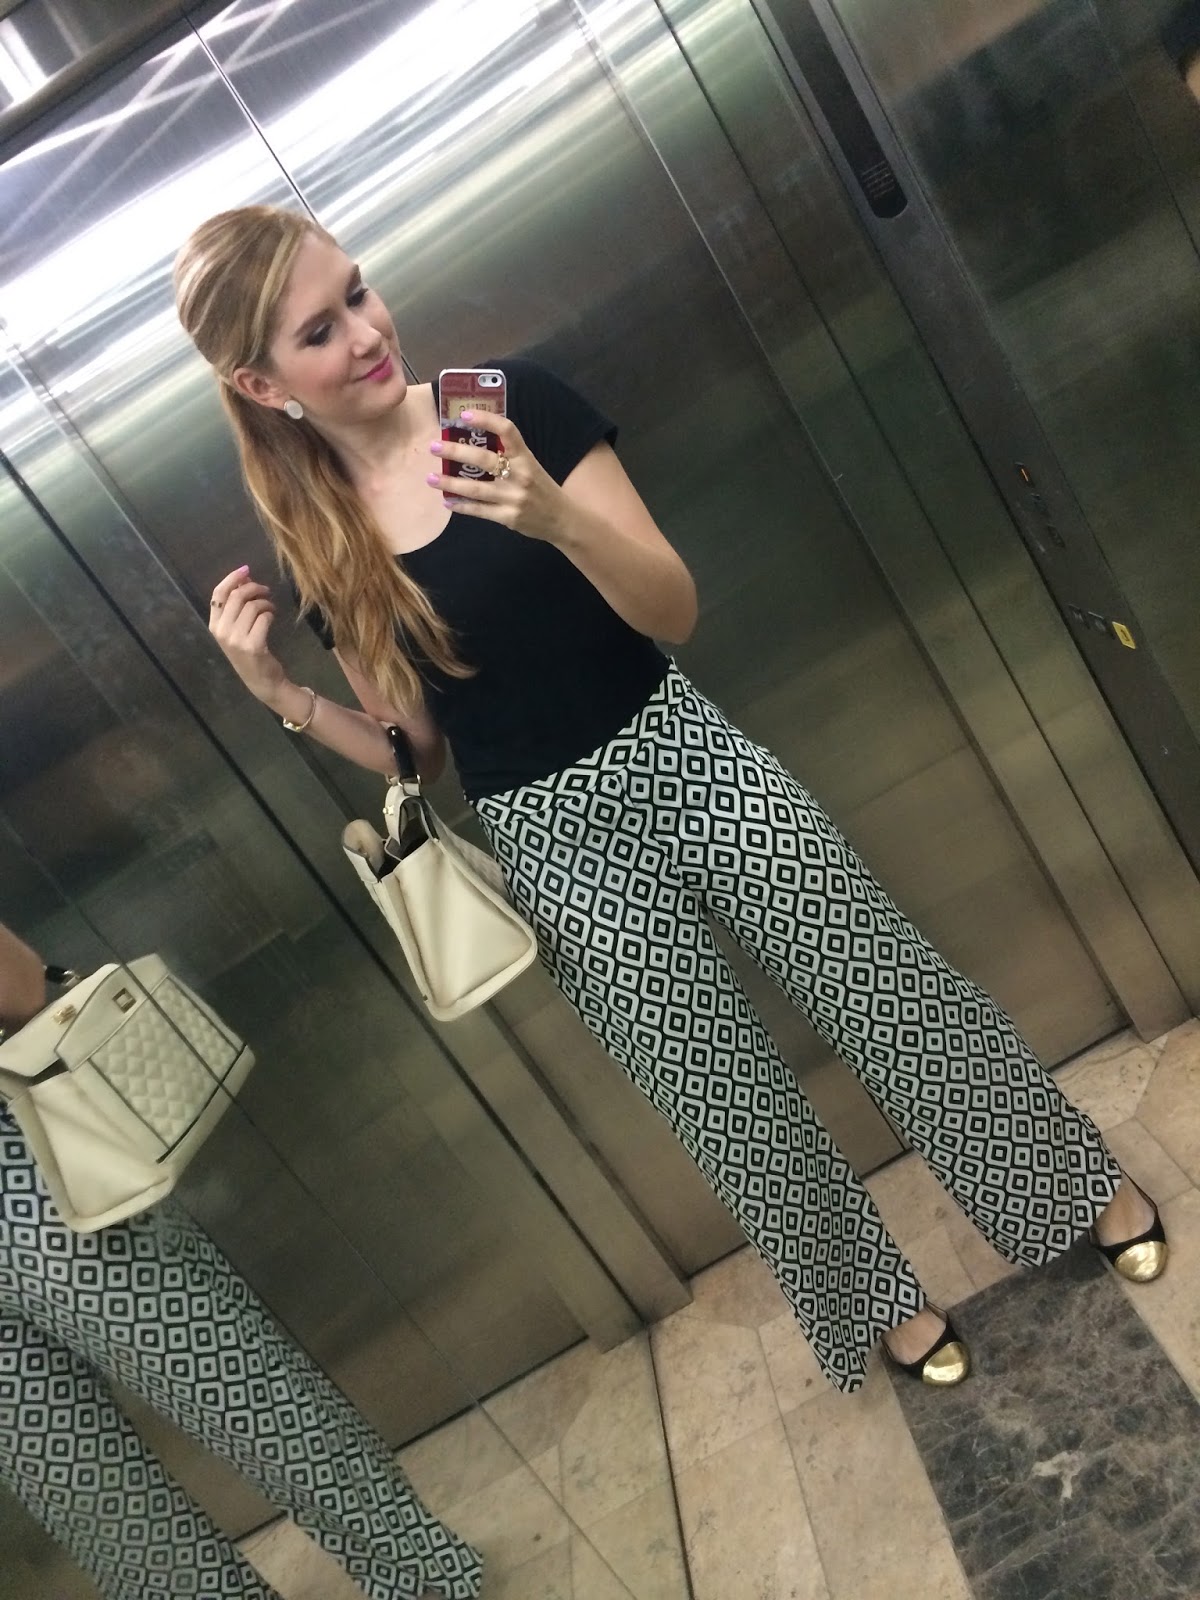 Wear patterned pants to work to show your personality!